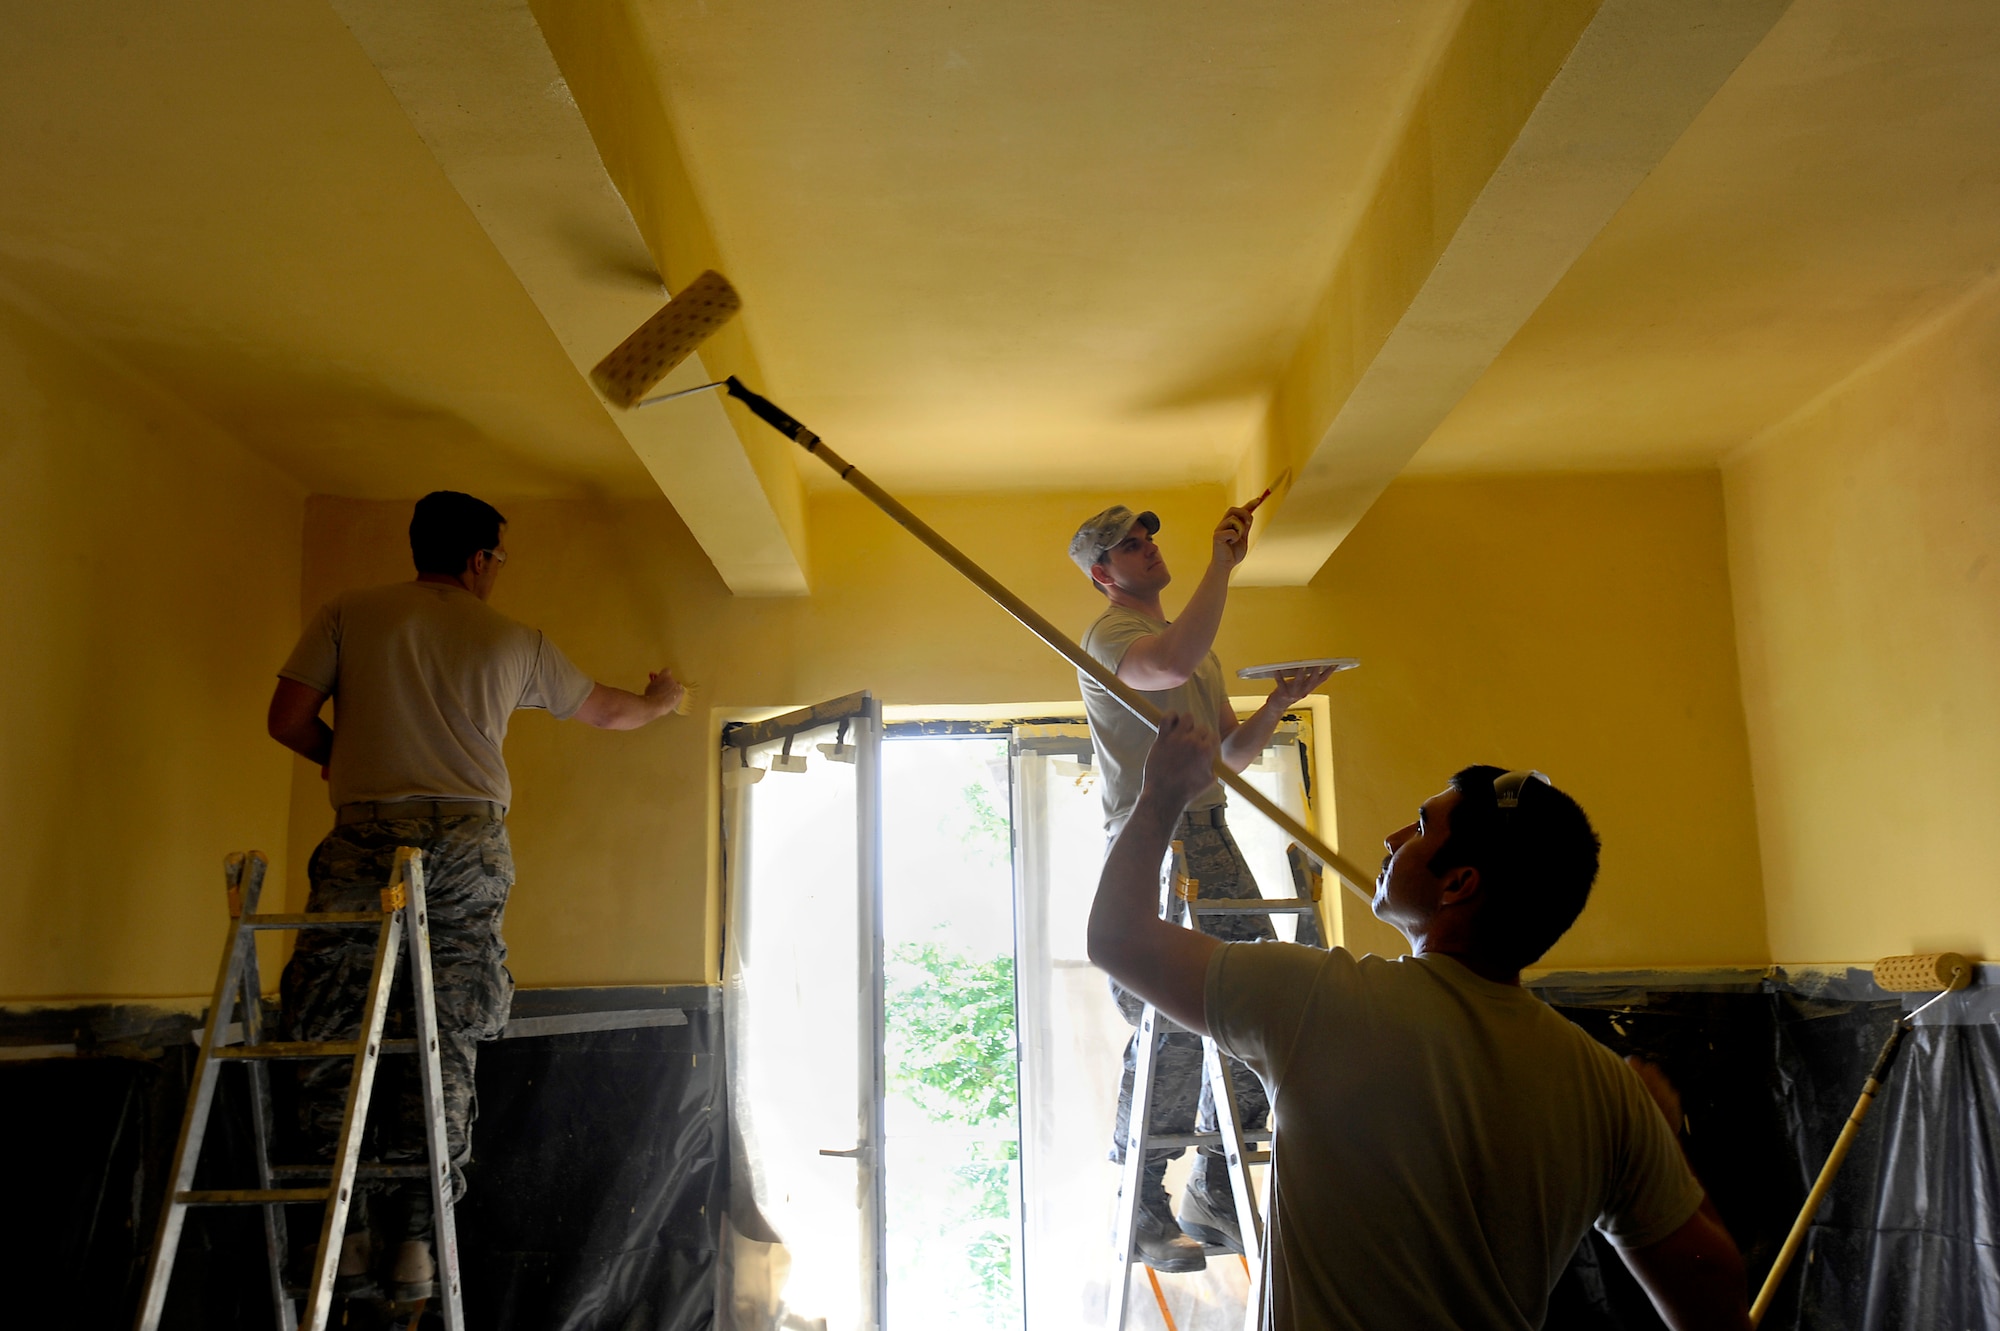 Oregon Air National Guard Airmen assigned to the 142nd Fighter Wing Civil engineer squadron work together to paint clinical treatment rooms at a medical facility in the city of Mangalia, Romania, May 18, 2015, as part of the U.S. European Command’s (EUCOM) Humanitarian Civic Assistance Program (HCA). The EUCOM HCA program is designed to improve the host nation's critical infrastructure and the underlying living conditions of the civilian populace. (U.S. Air National Guard photo by Tech. Sgt. John Hughel, 142nd Fighter Wing Public Affairs/Released)